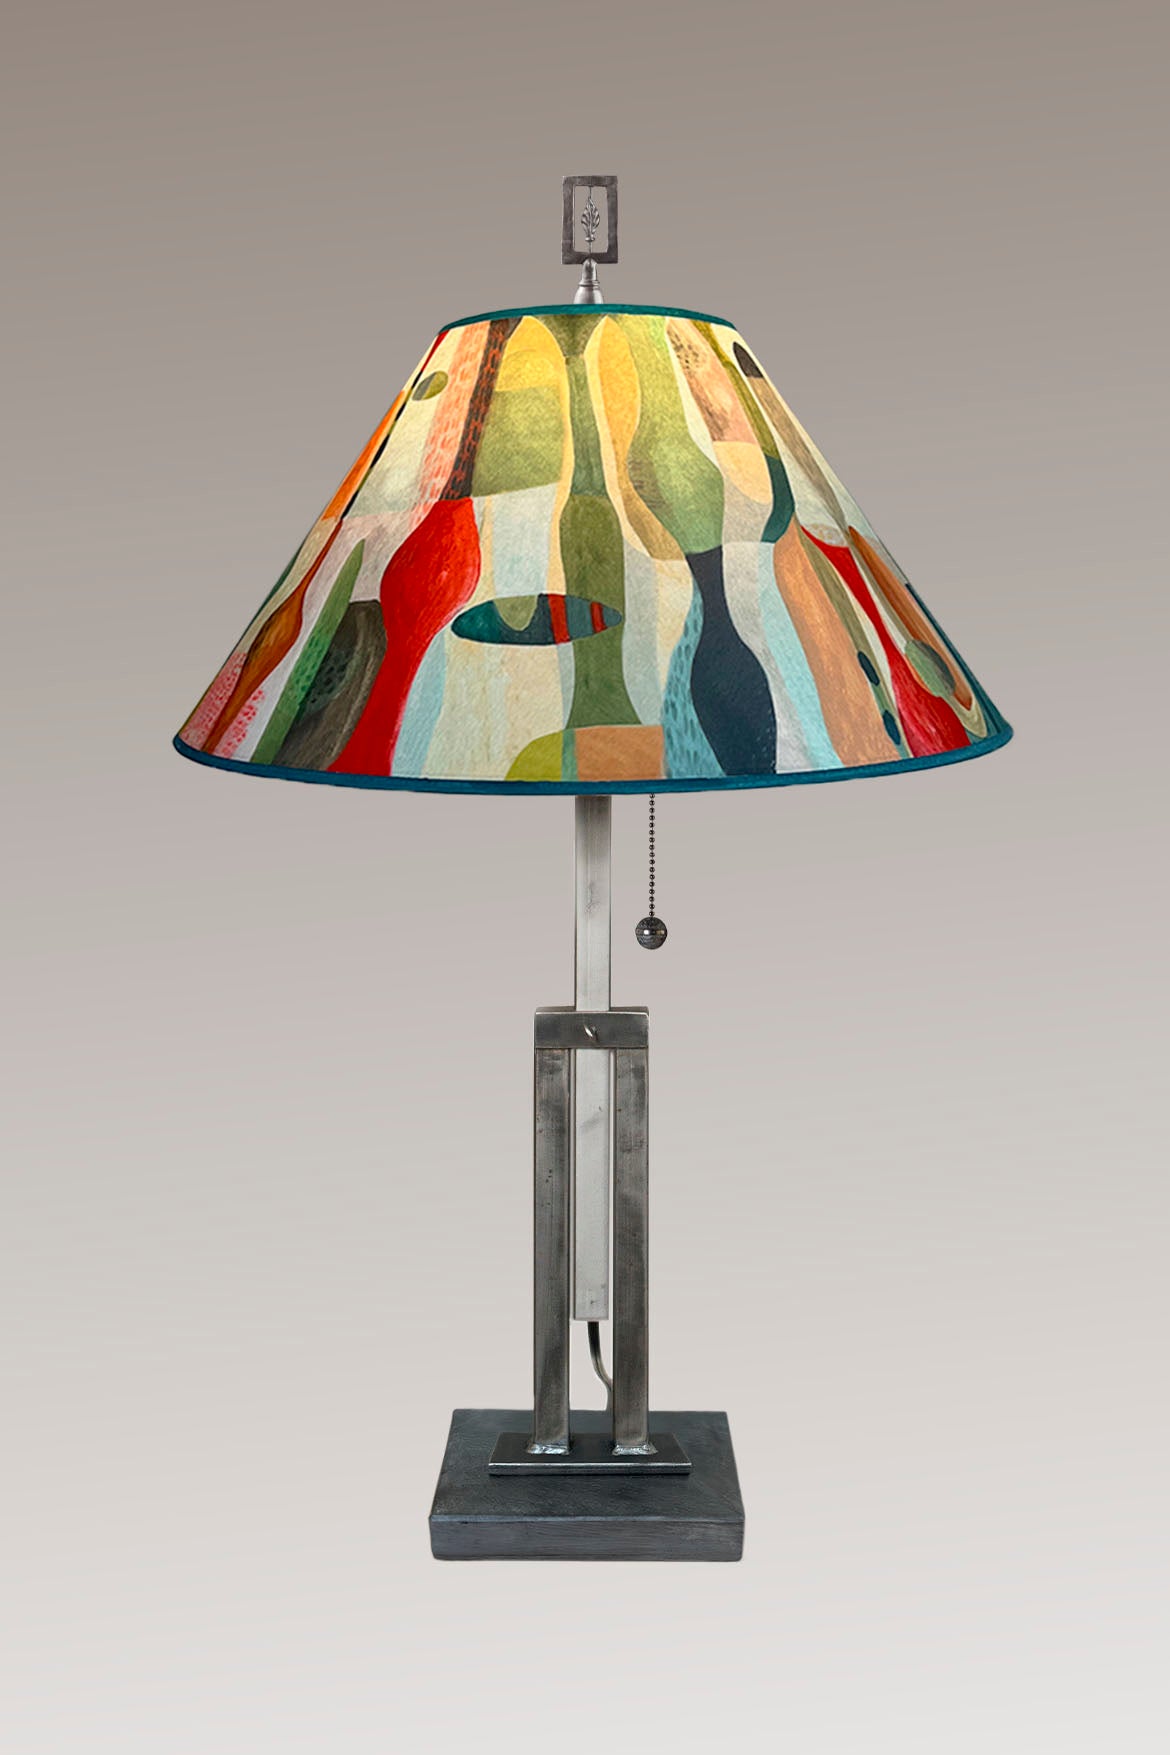 Janna Ugone & Co Table Lamp Adjustable-Height Steel Table Lamp with Large Conical Shade in Riviera in Poppy